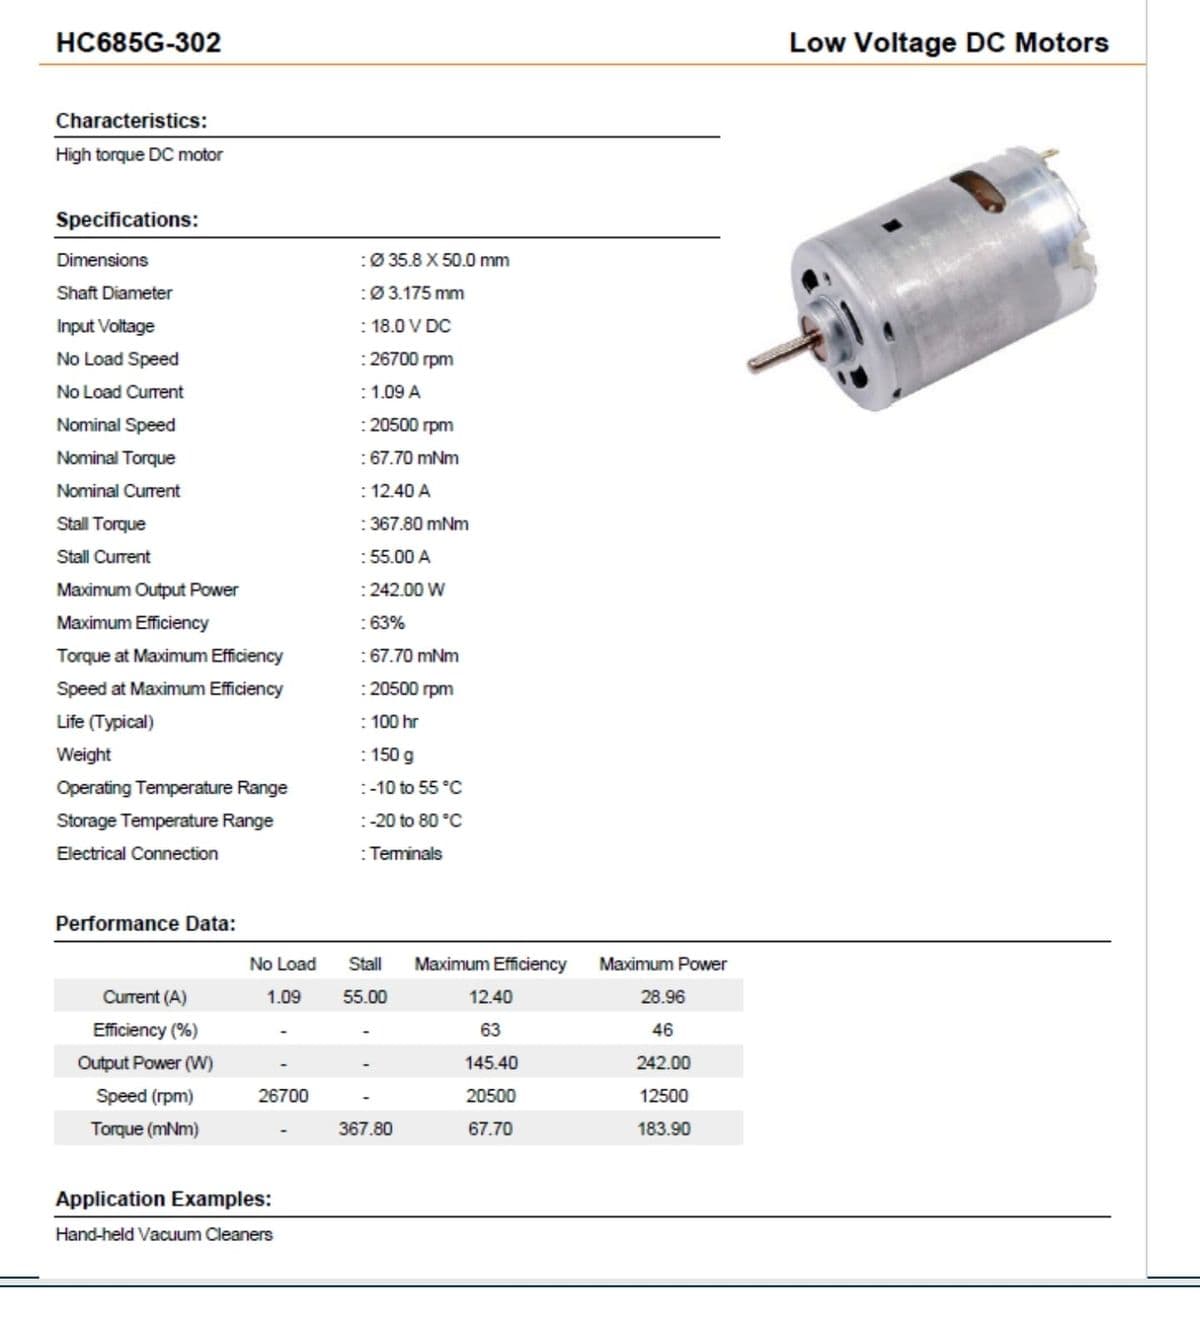 HC685G-302
Characteristics:
High torque DC motor
Specifications:
Dimensions
Shaft Diameter
Input Voltage
No Load Speed
No Load Current
Nominal Speed
Nominal Torque
Nominal Current
Stall Torque
Stall Current
Maximum Output Power
Maximum Efficiency
Torque at Maximum Efficiency
Speed at Maximum Efficiency
Life (Typical)
Weight
Operating Temperature Range
Storage Temperature Range
Electrical Connection
Performance Data:
Current (A)
Efficiency (%)
Output Power (W)
Speed (rpm)
Torque (mNm)
No Load
1.09
26700
Application Examples:
Hand-held Vacuum Cleaners
:Ø 35.8 X 50.0 mm
: Ø 3.175 mm
: 18.0 V DC
: 26700 rpm
: 1.09 A
: 20500 rpm
: 67.70 mNm
: 12.40 A
: 367.80 mNm
: 55.00 A
: 242.00 W
: 63%
: 67.70 mNm
: 20500 rpm
: 100 hr
: 150 g
: -10 to 55 °C
: -20 to 80 °C
: Terminals
Stall Maximum Efficiency
55.00
367.80
12.40
63
145.40
20500
67.70
Maximum Power
28.96
46
242.00
12500
183.90
Low Voltage DC Motors